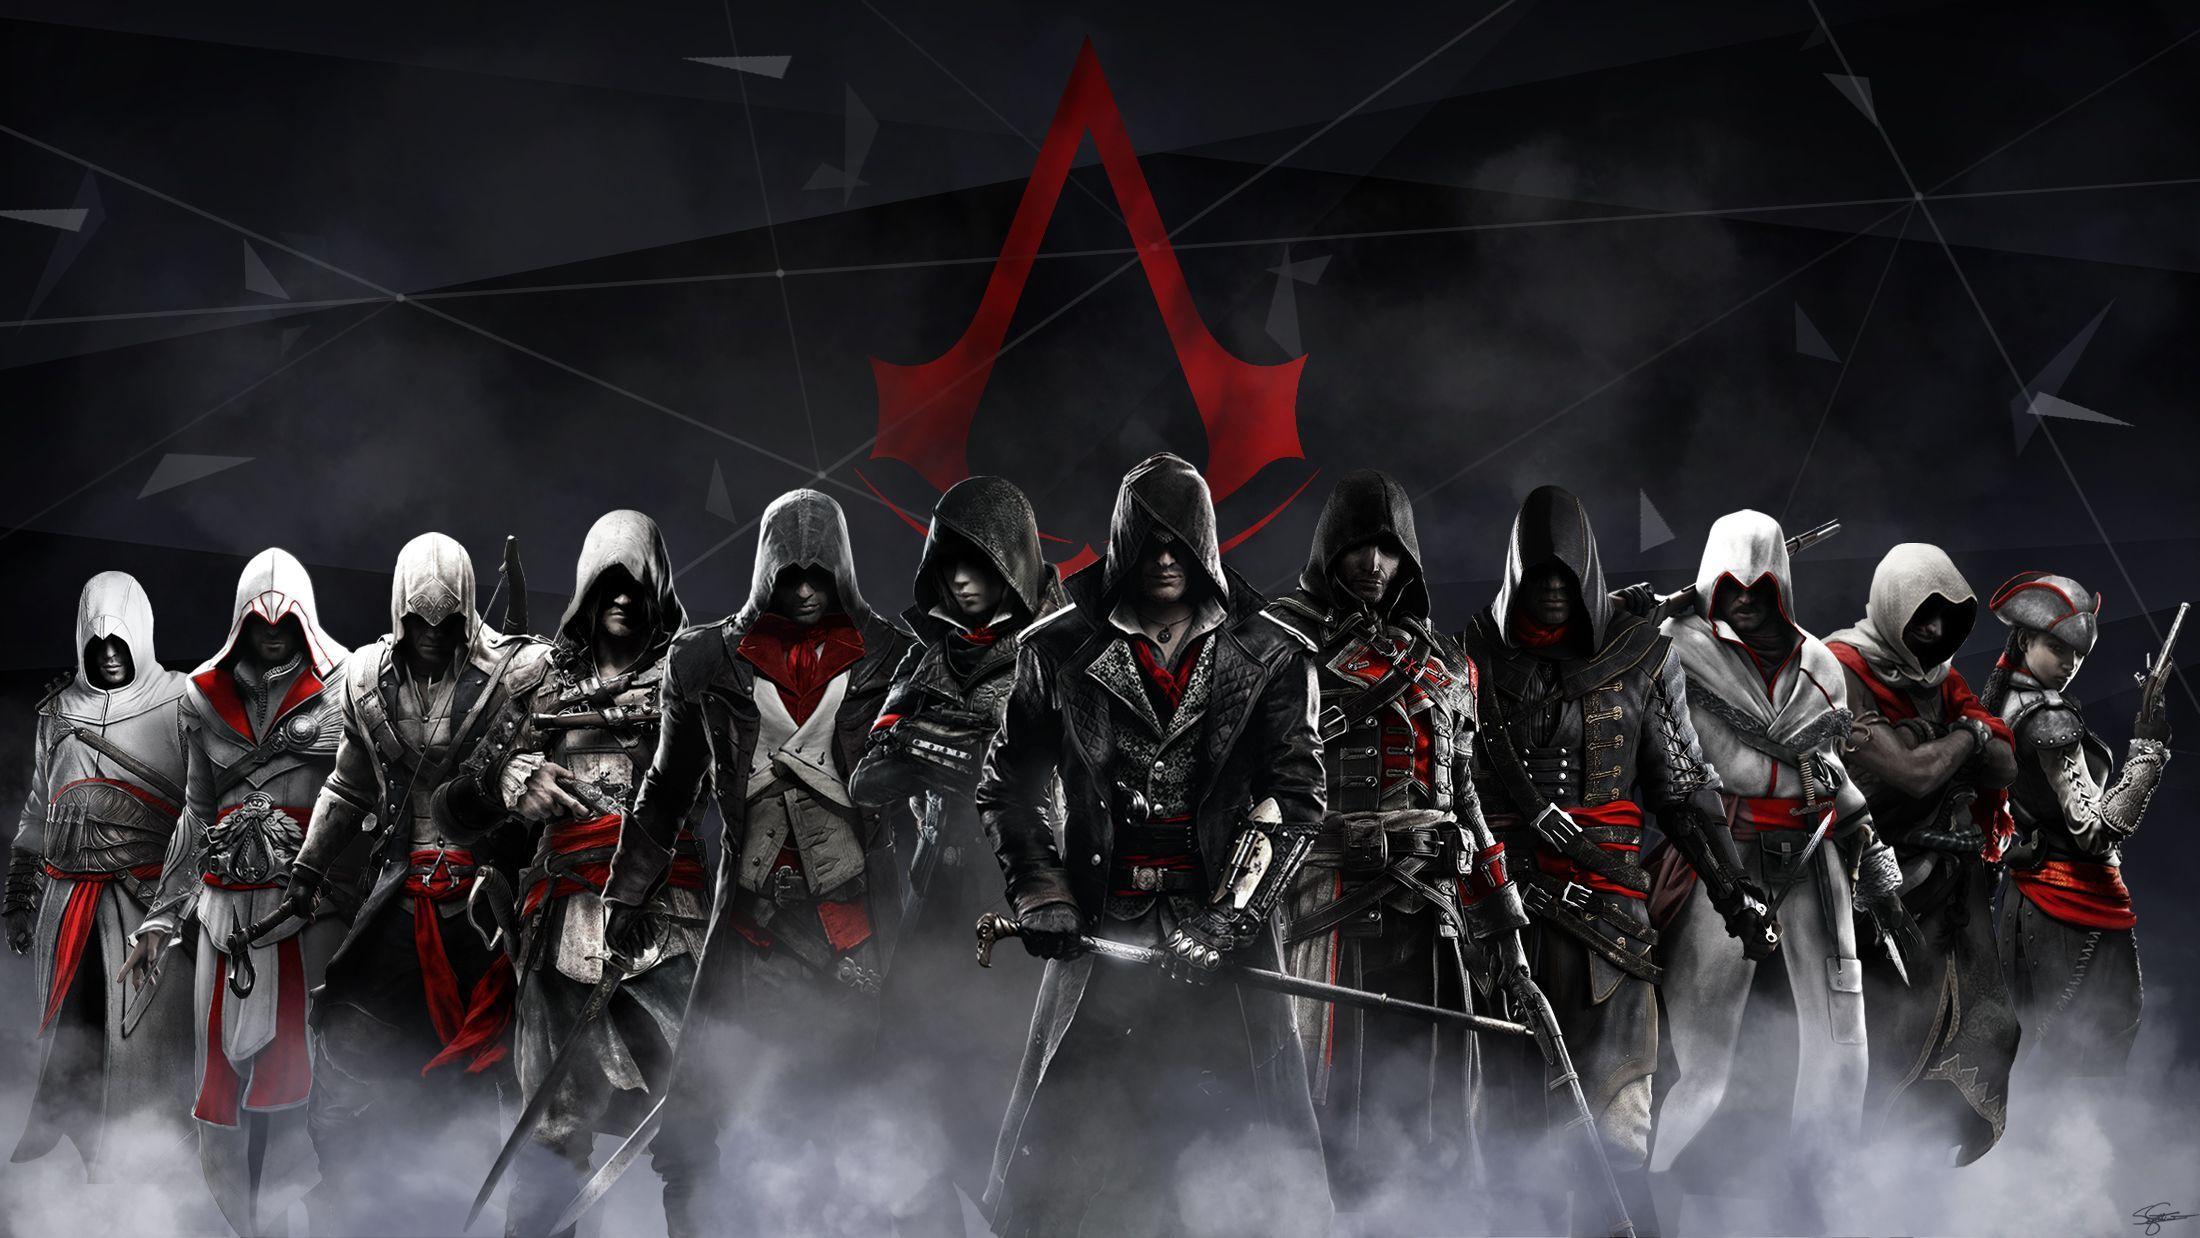 Assassins Creed Backgrounds - Wallpaper Cave